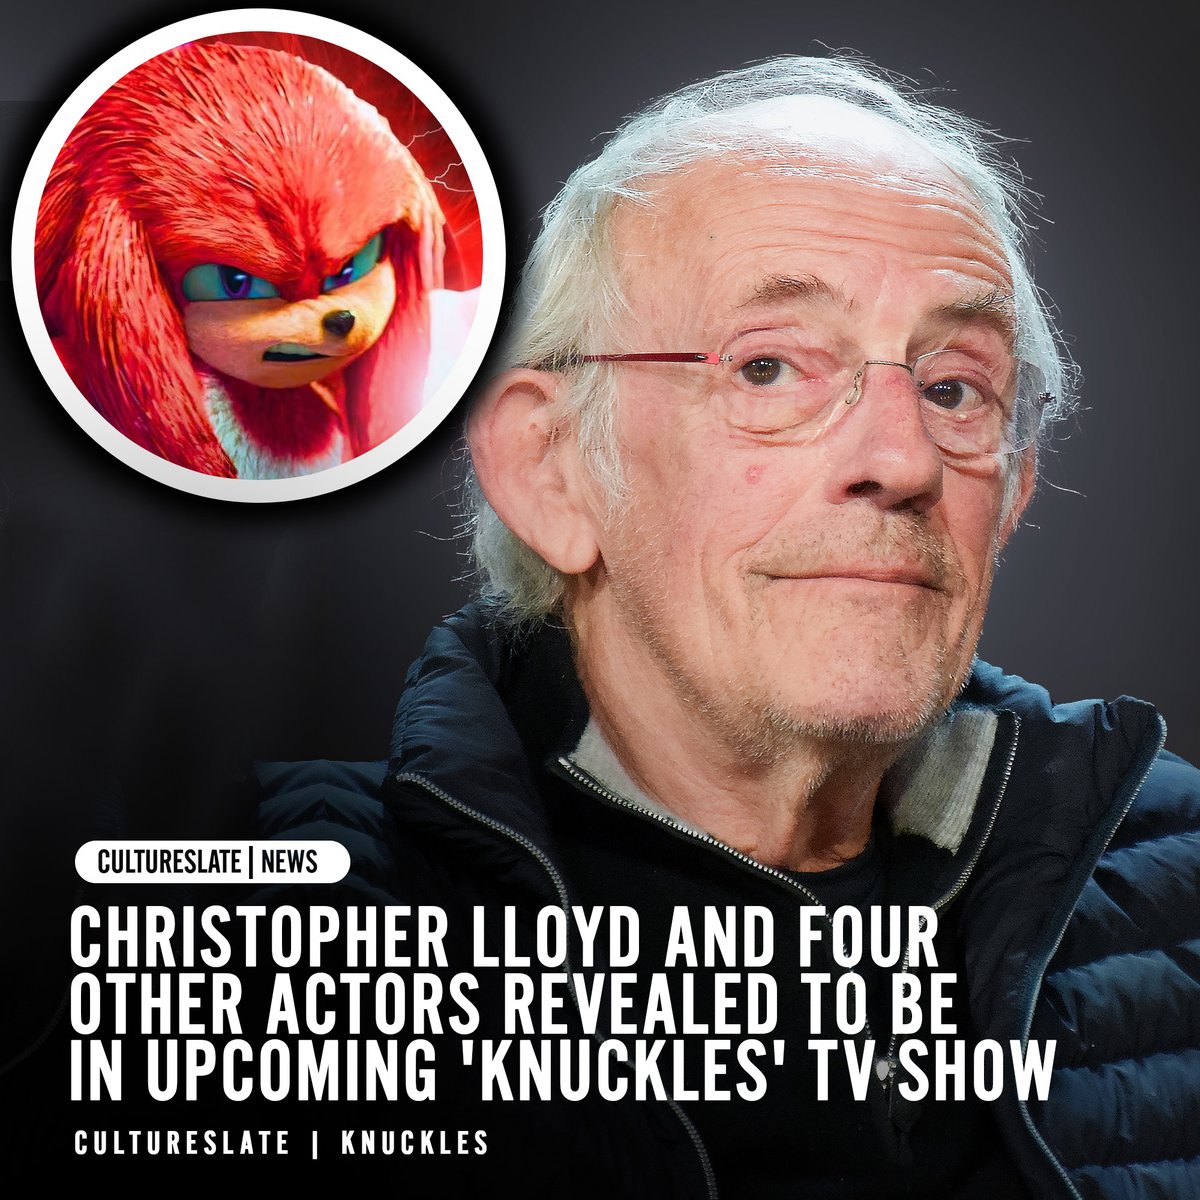 The upcoming #SonicTheHedgehog spin-off series ‘#Knuckles’ has just gained some new cast members, including Stockard Channing, Rob Huebel, Paul Scheer, Cary Elwes, and Christopher Lloyd. 🎬 ow.ly/2izX50P1XRl